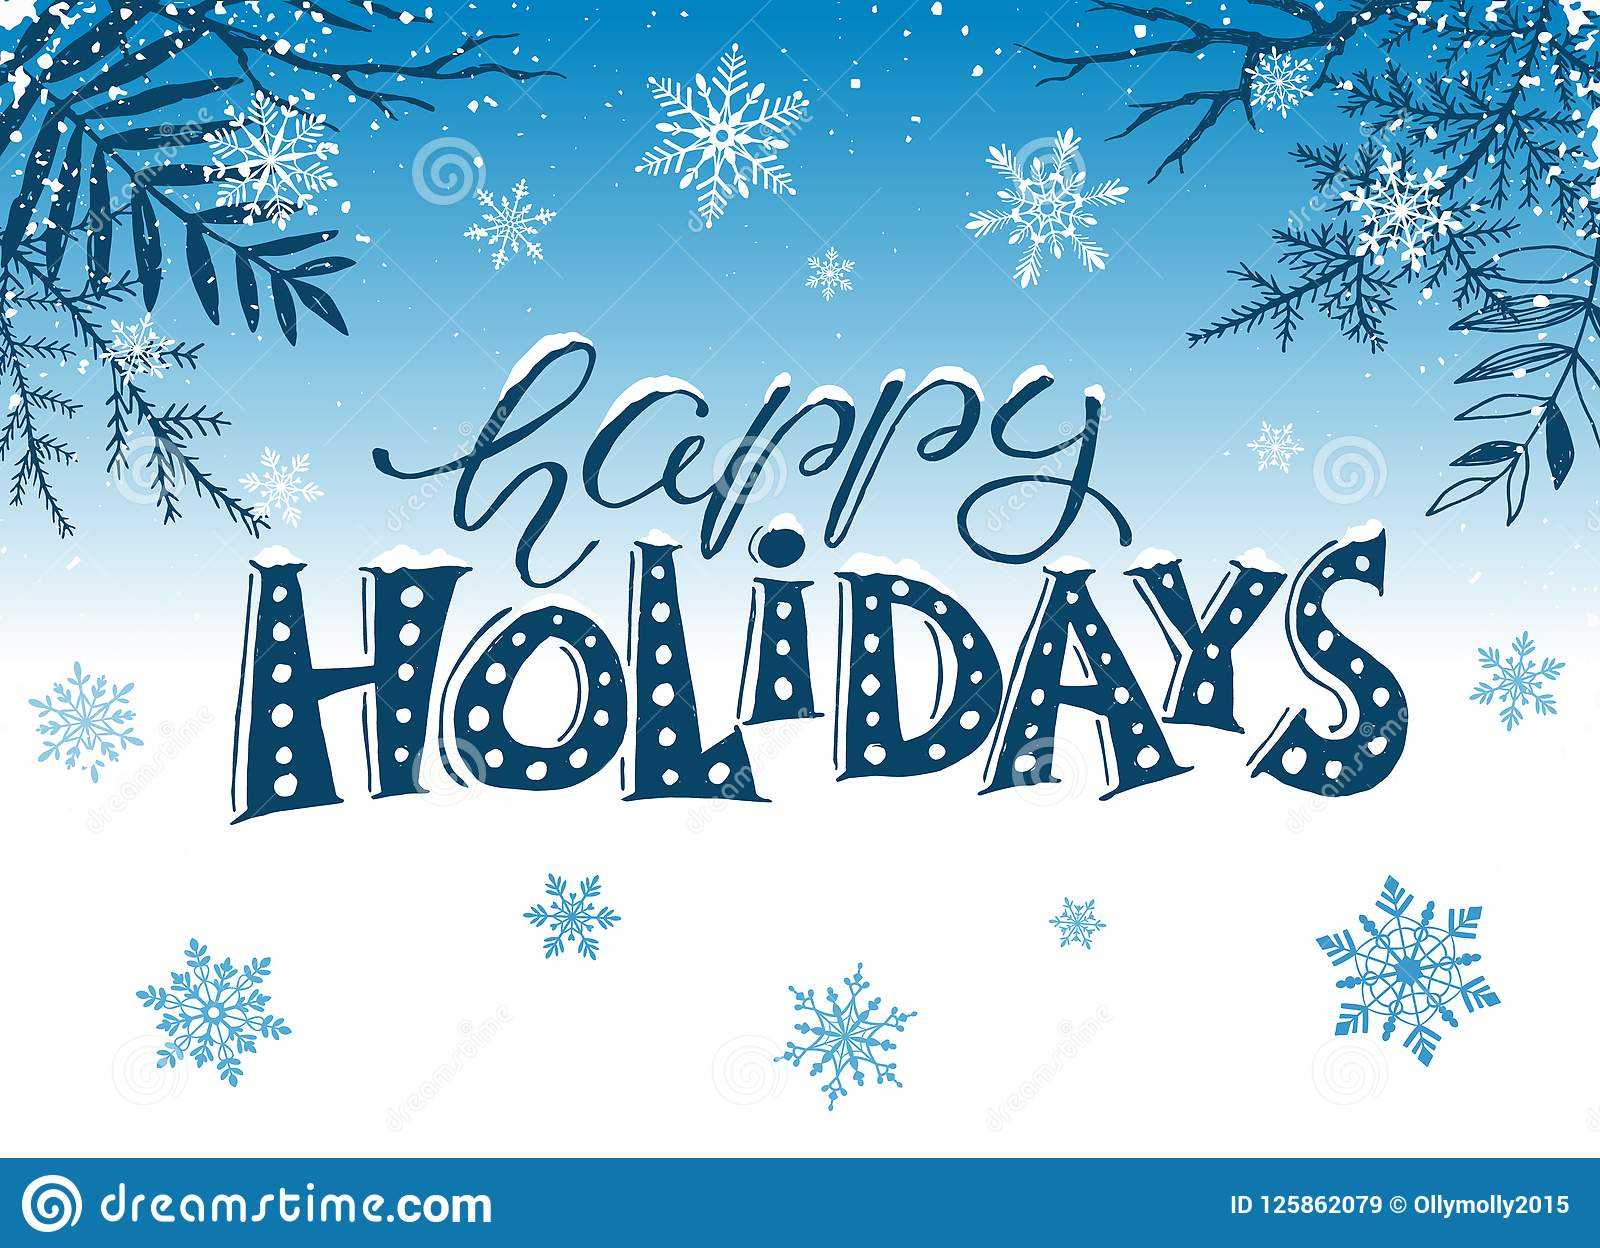 Happy Holidays Greeting Card Stock Vector – Illustration Of Throughout Happy Holidays Card Template